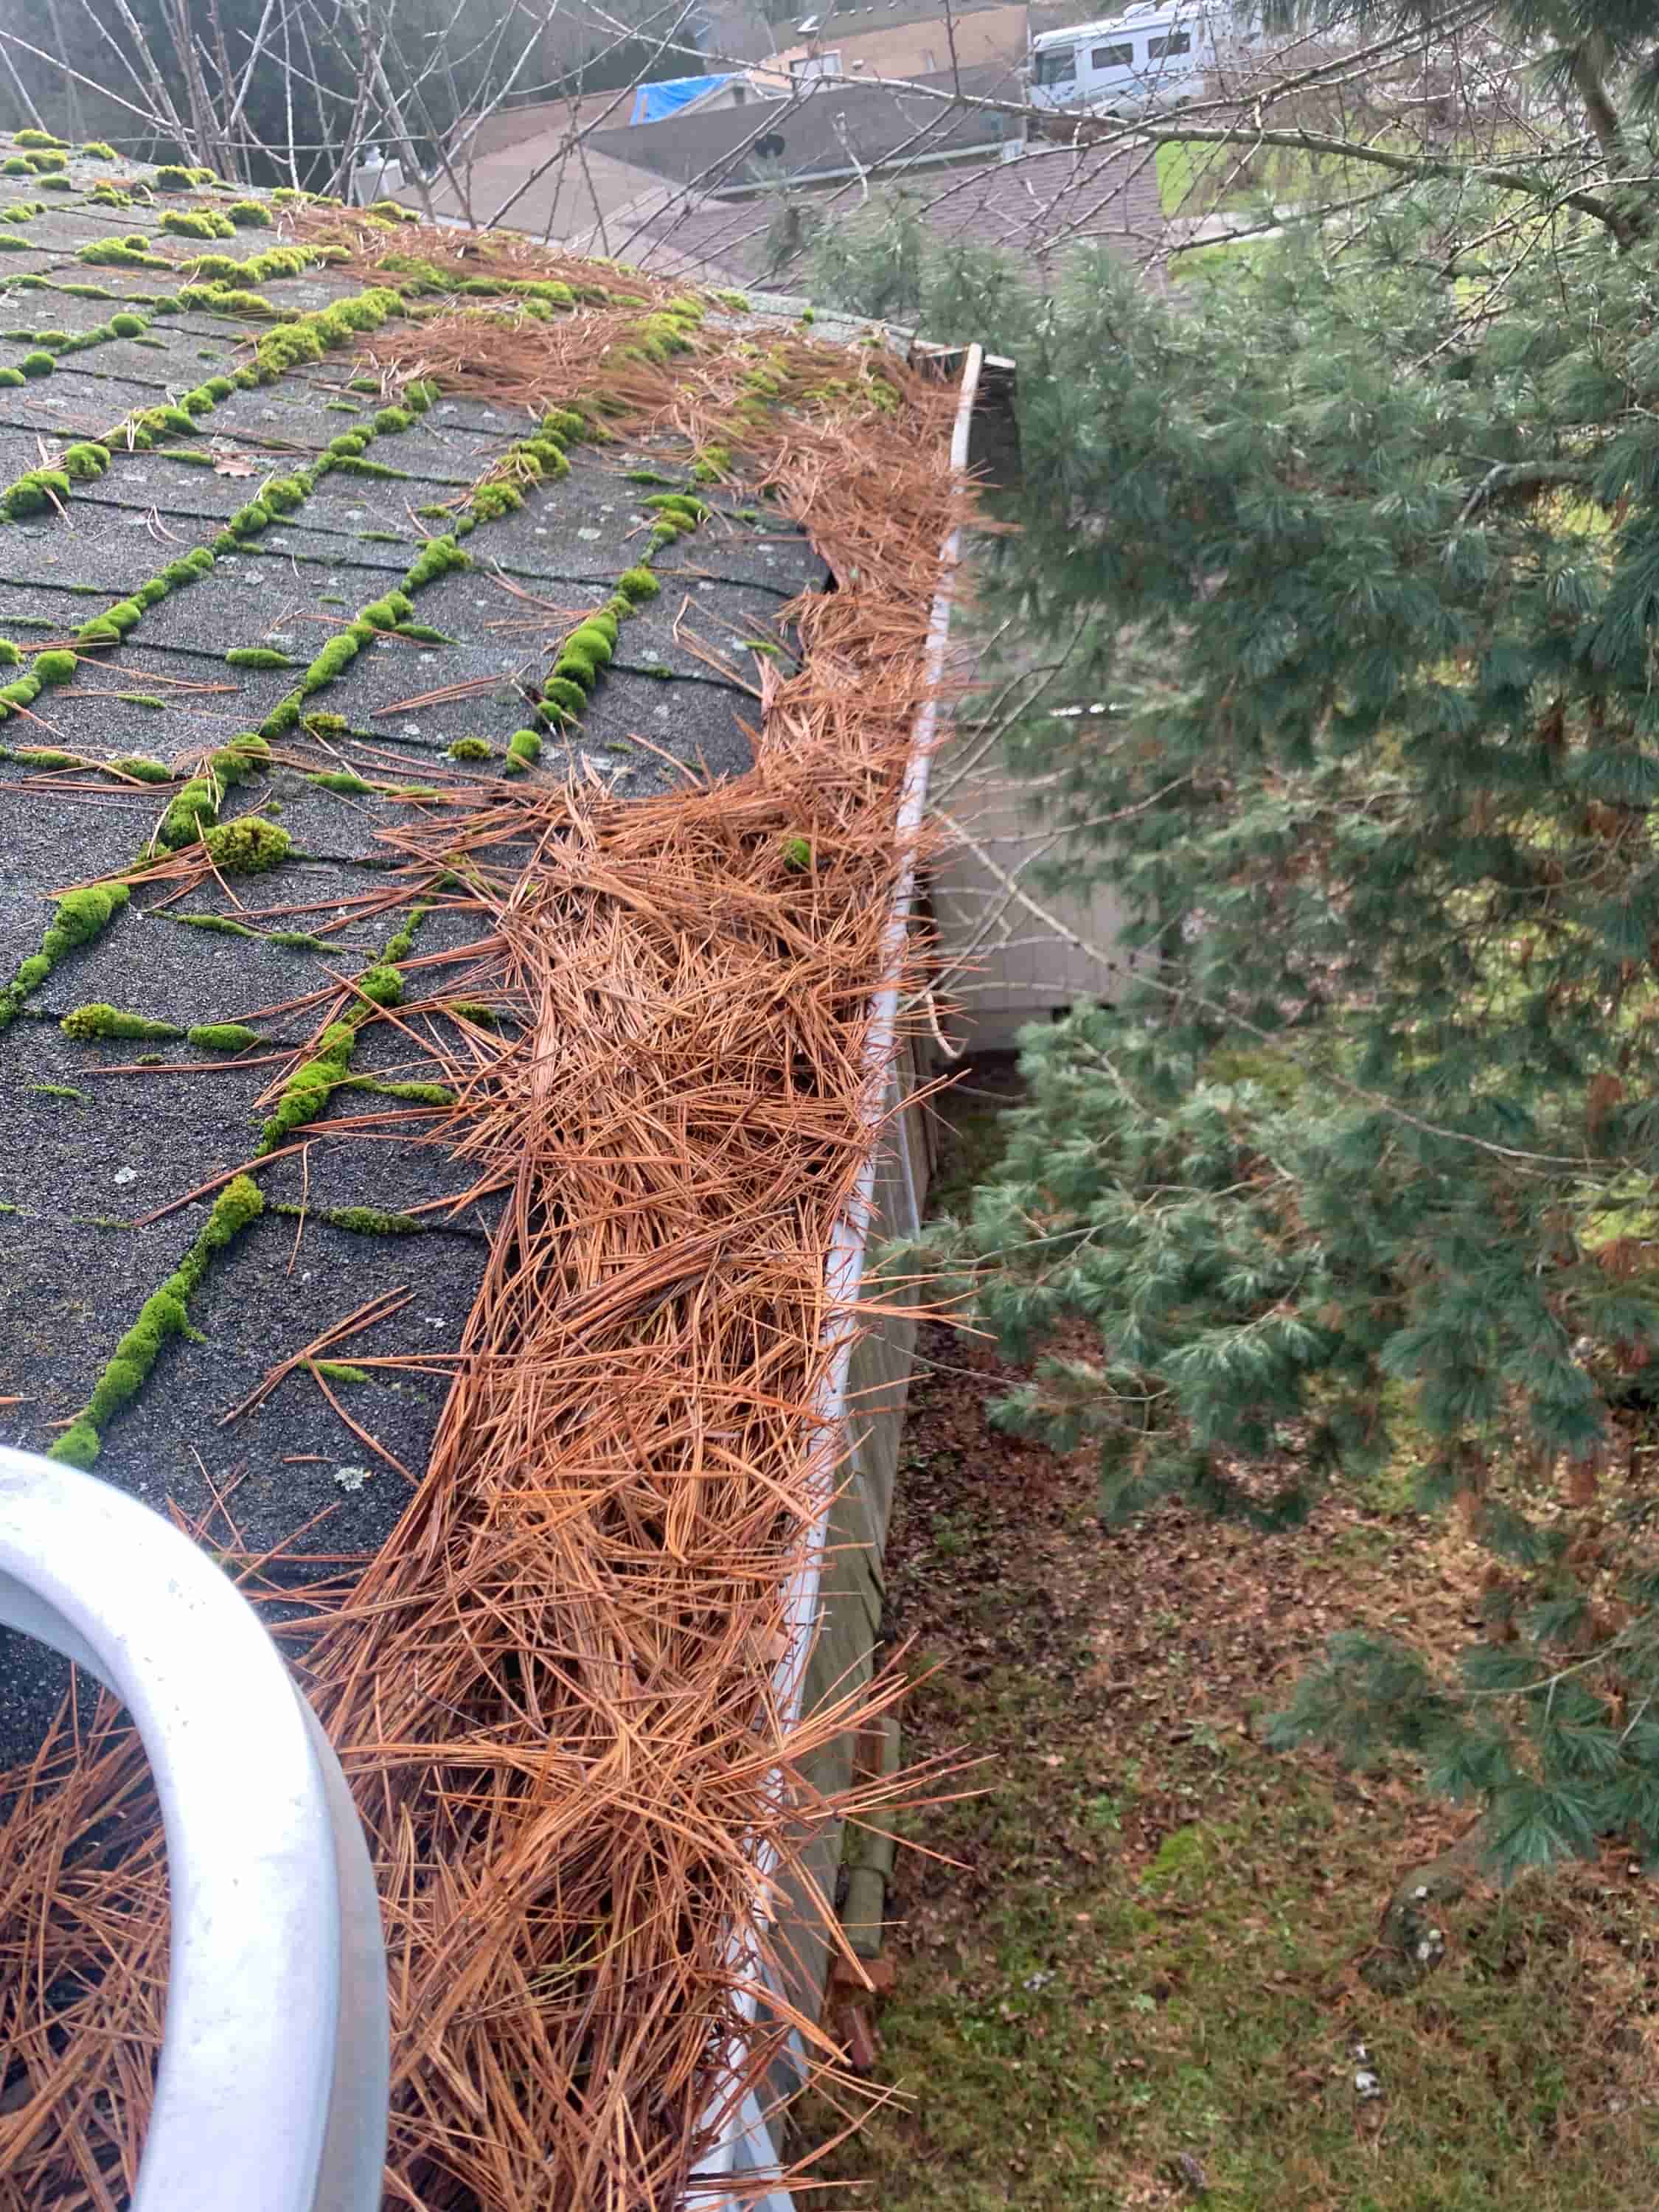 how much to have gutters cleaned